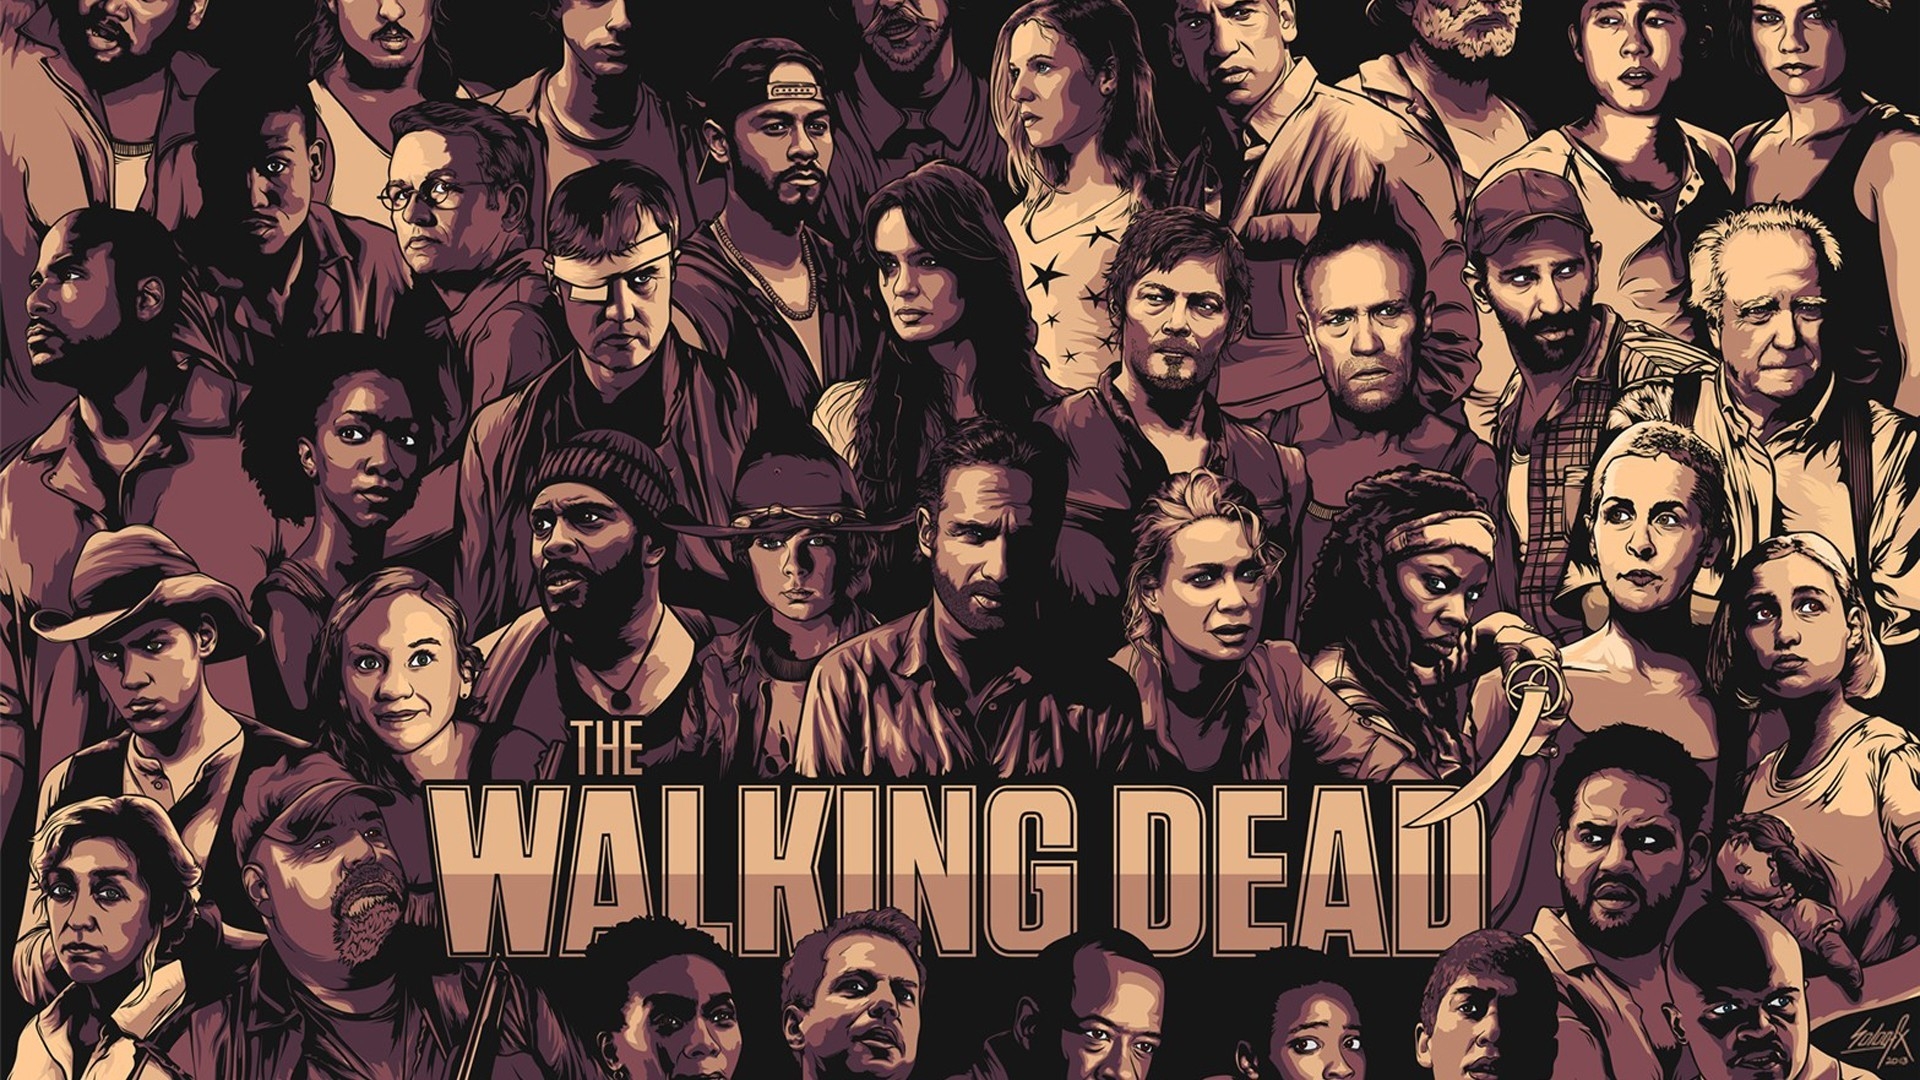 The Walking Dead Cool Poster for 1920 x 1080 HDTV 1080p resolution